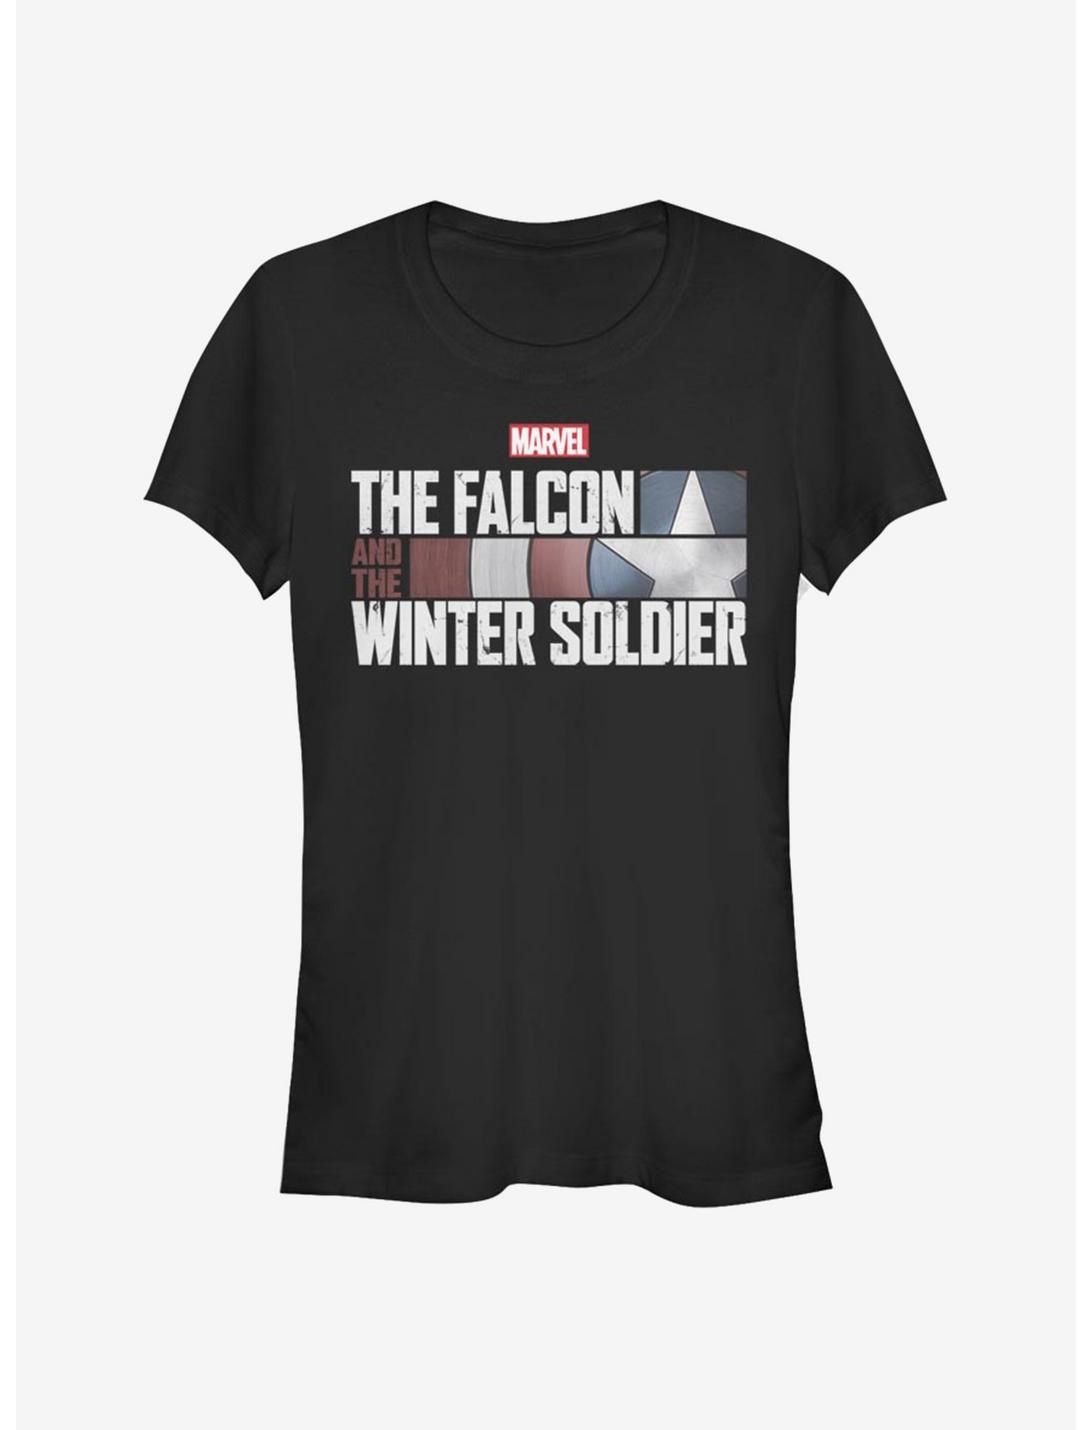 Marvel The Falcon And The Winter Soldier Girls T-Shirt, BLACK, hi-res